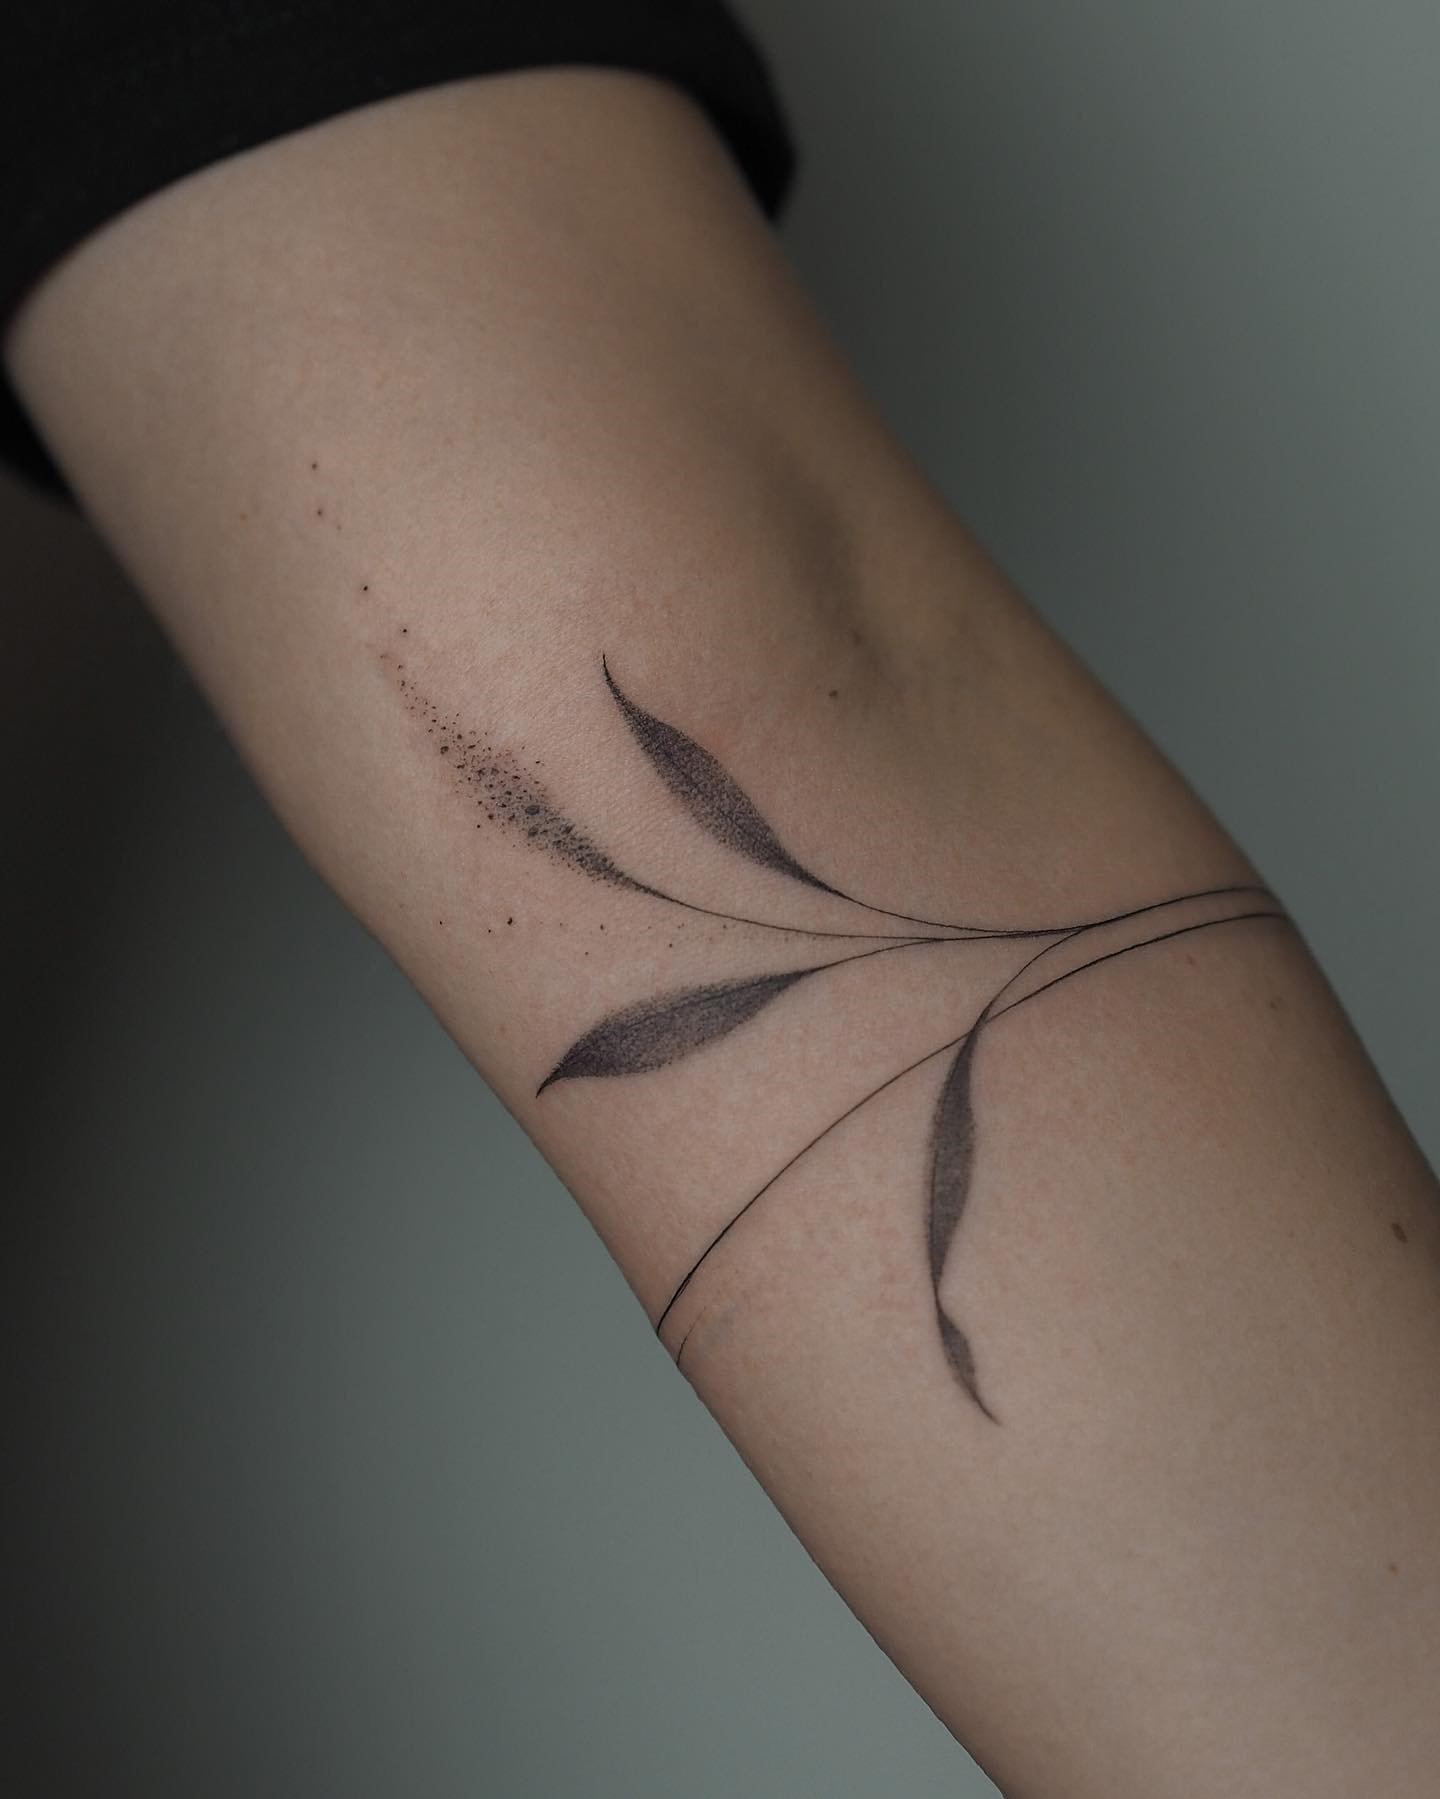 30 Meaningful and Beautiful Tattoo Ideas For Women - Flymeso Blog